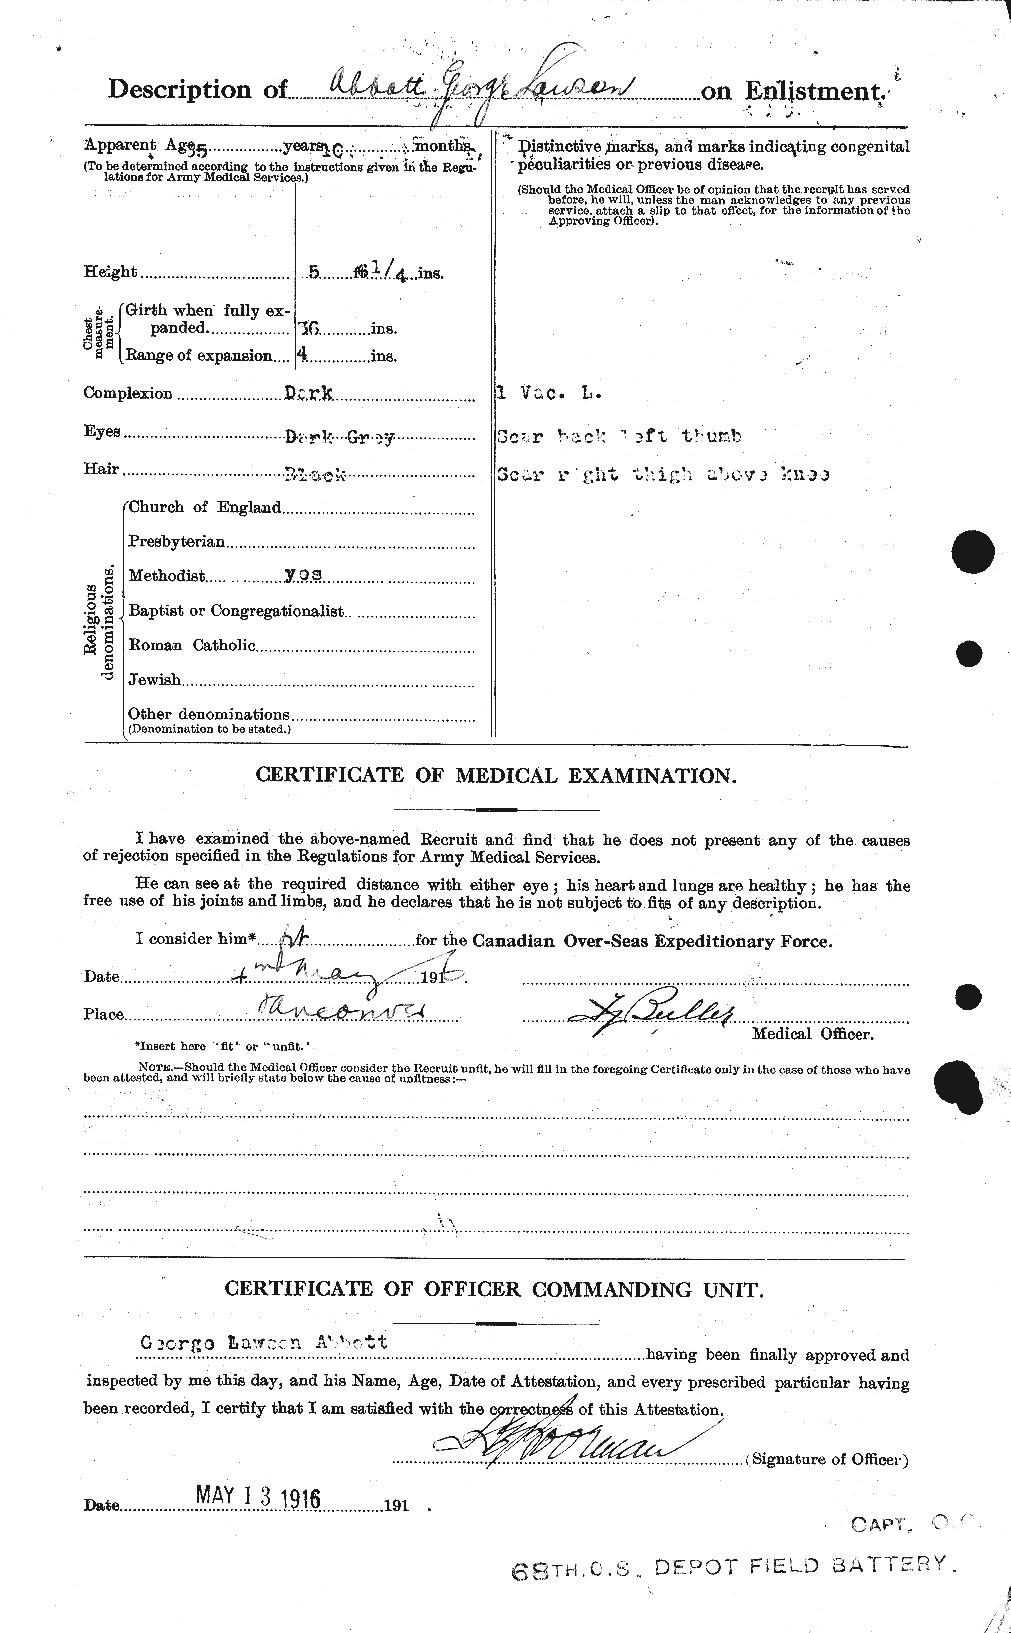 Personnel Records of the First World War - CEF 200943b